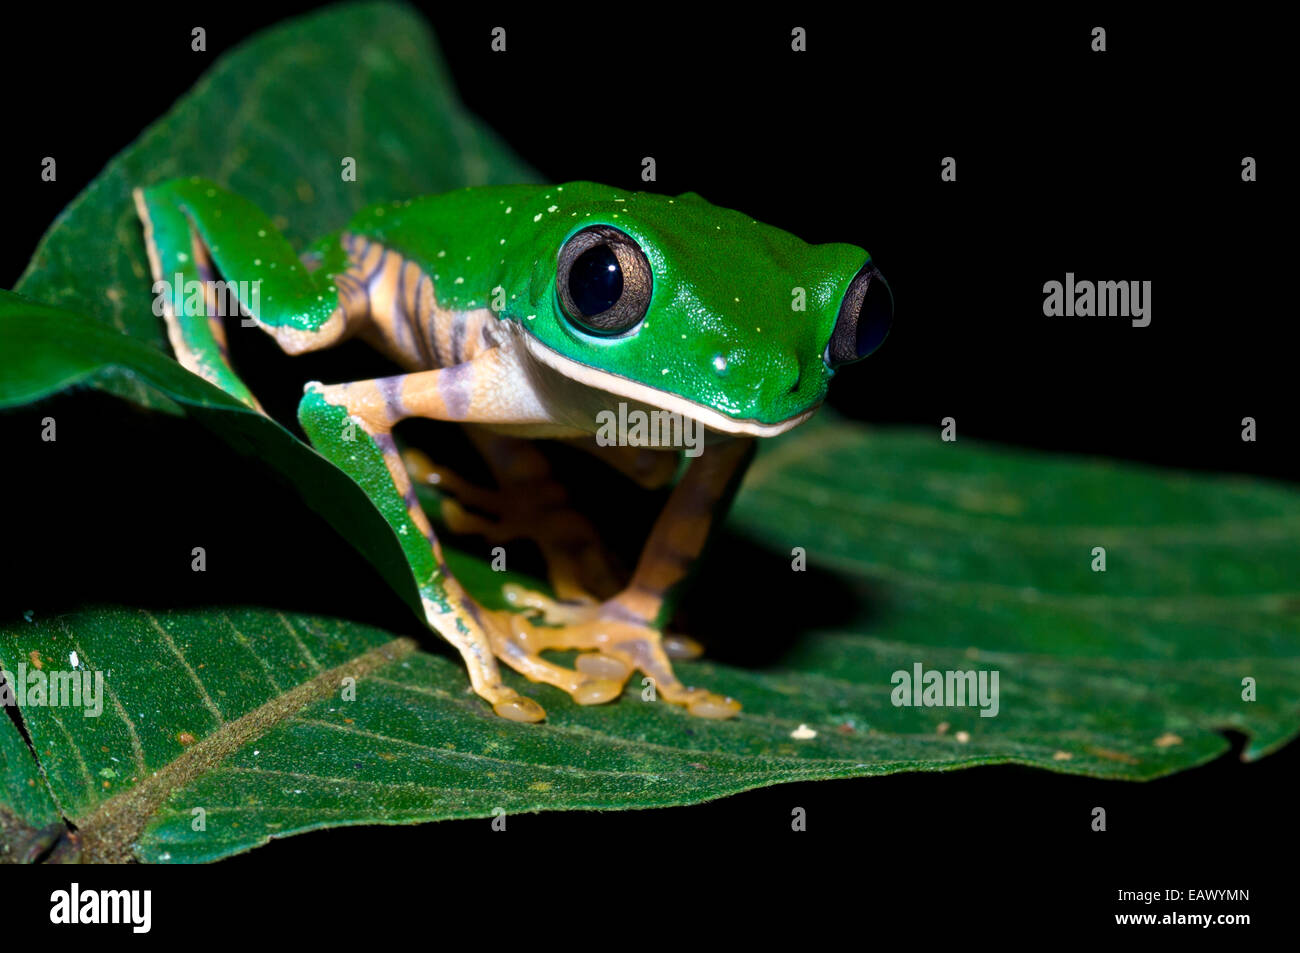 A bright green Barred Leaf Frog perched on an Inga leaf in the rainforest at night. Stock Photo